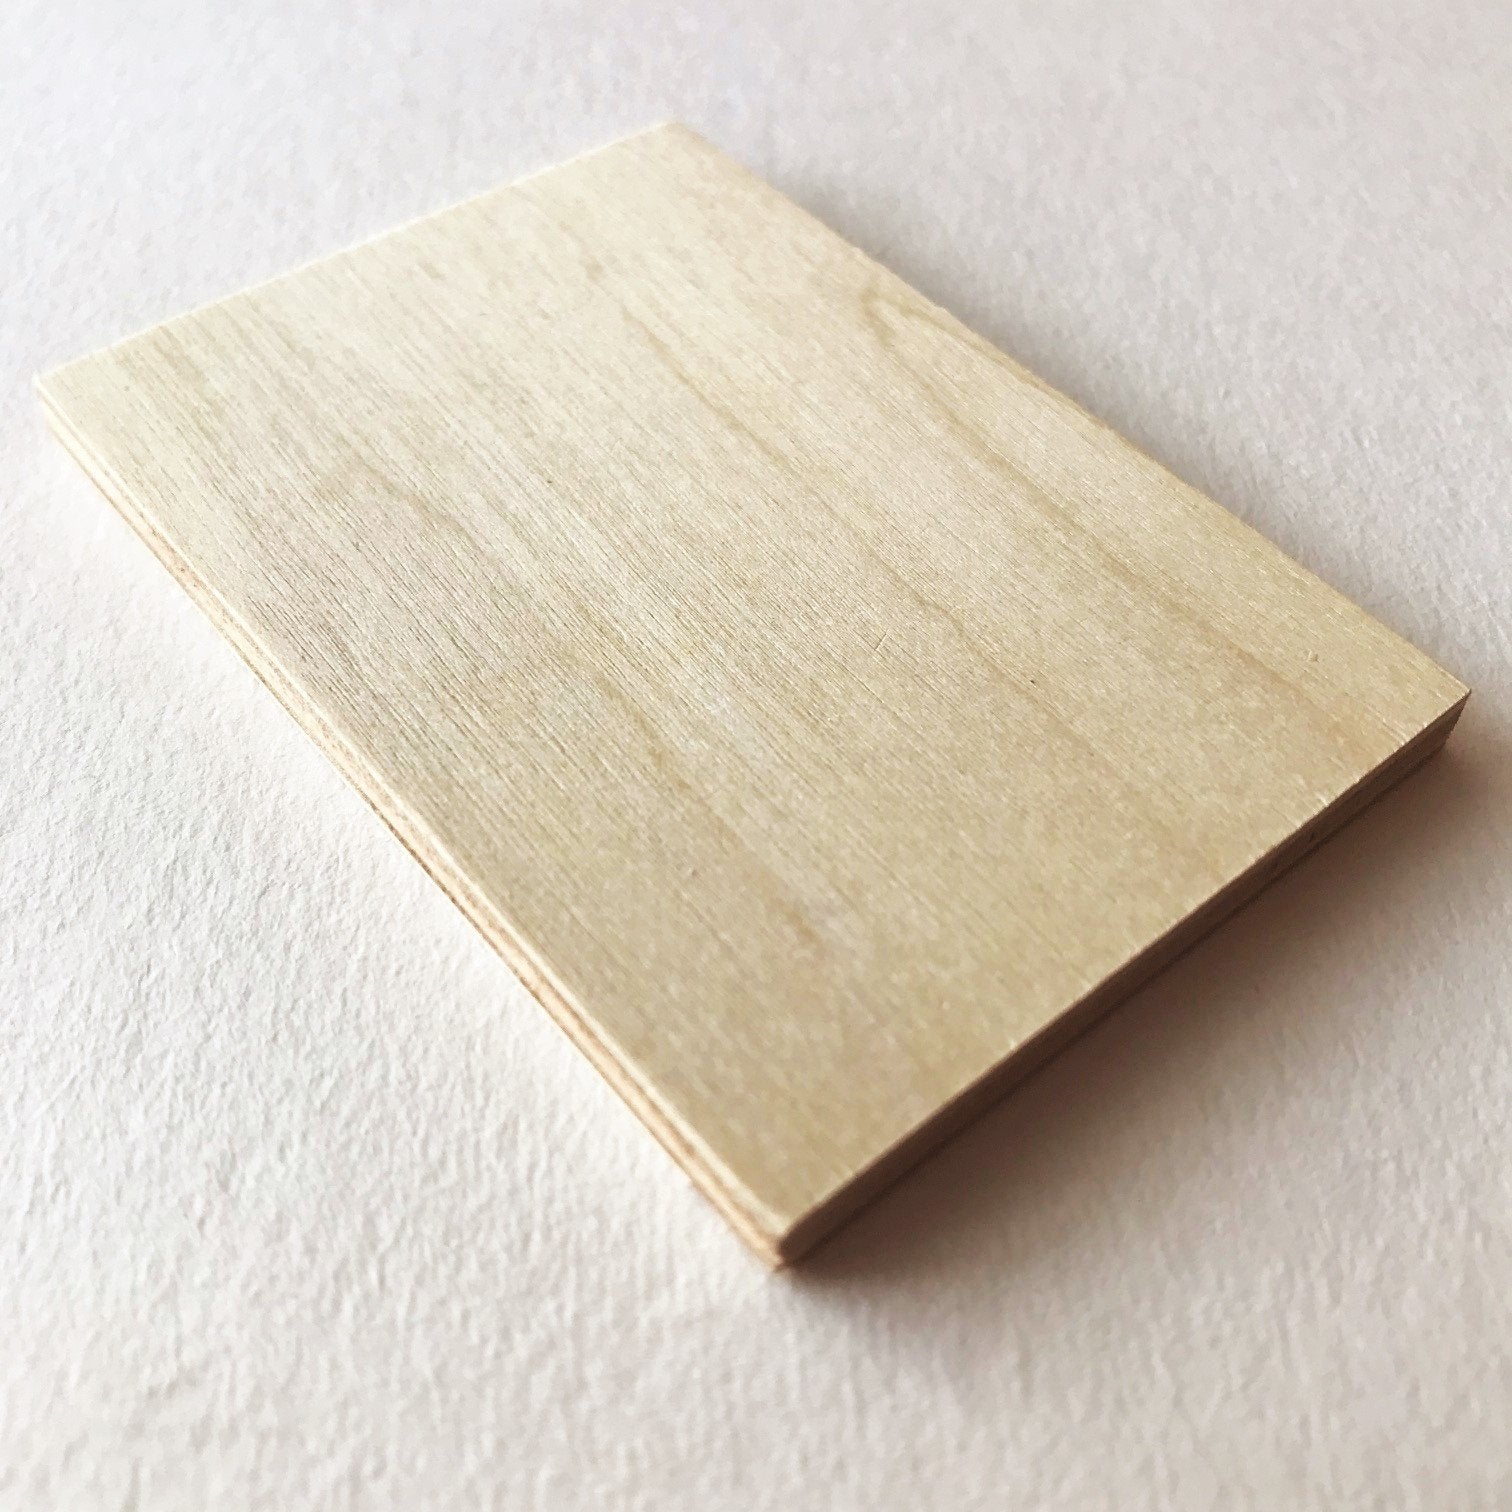 Where can someone buy thin sheets of wood for laser cutting? :  r/Laserengraving